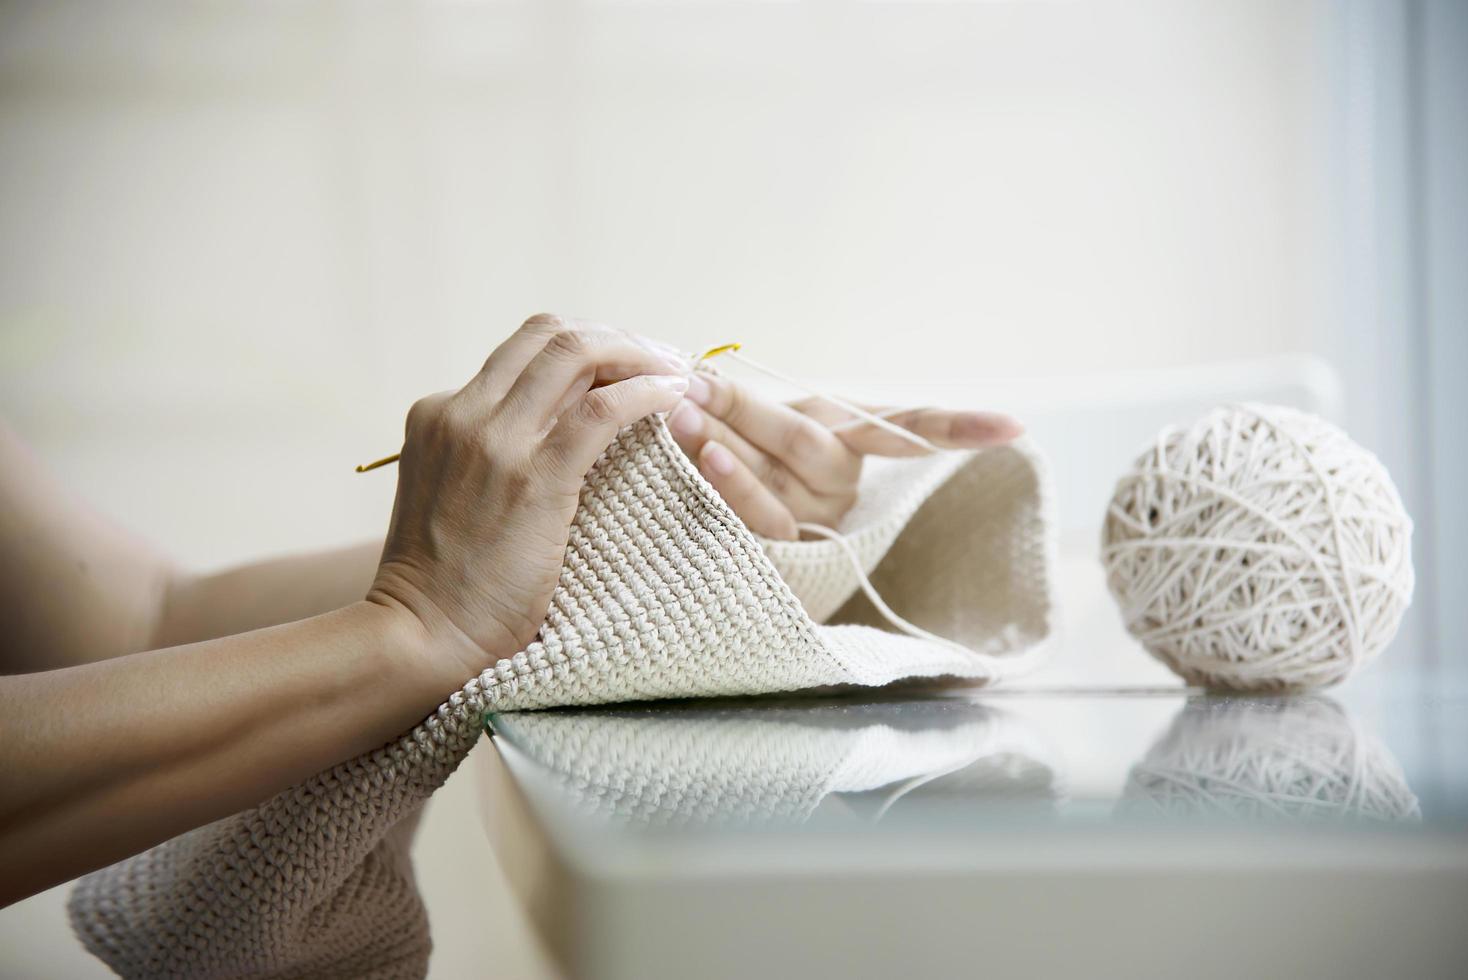 Woman's hands doing home knitting work - people with DIY work at home concept photo